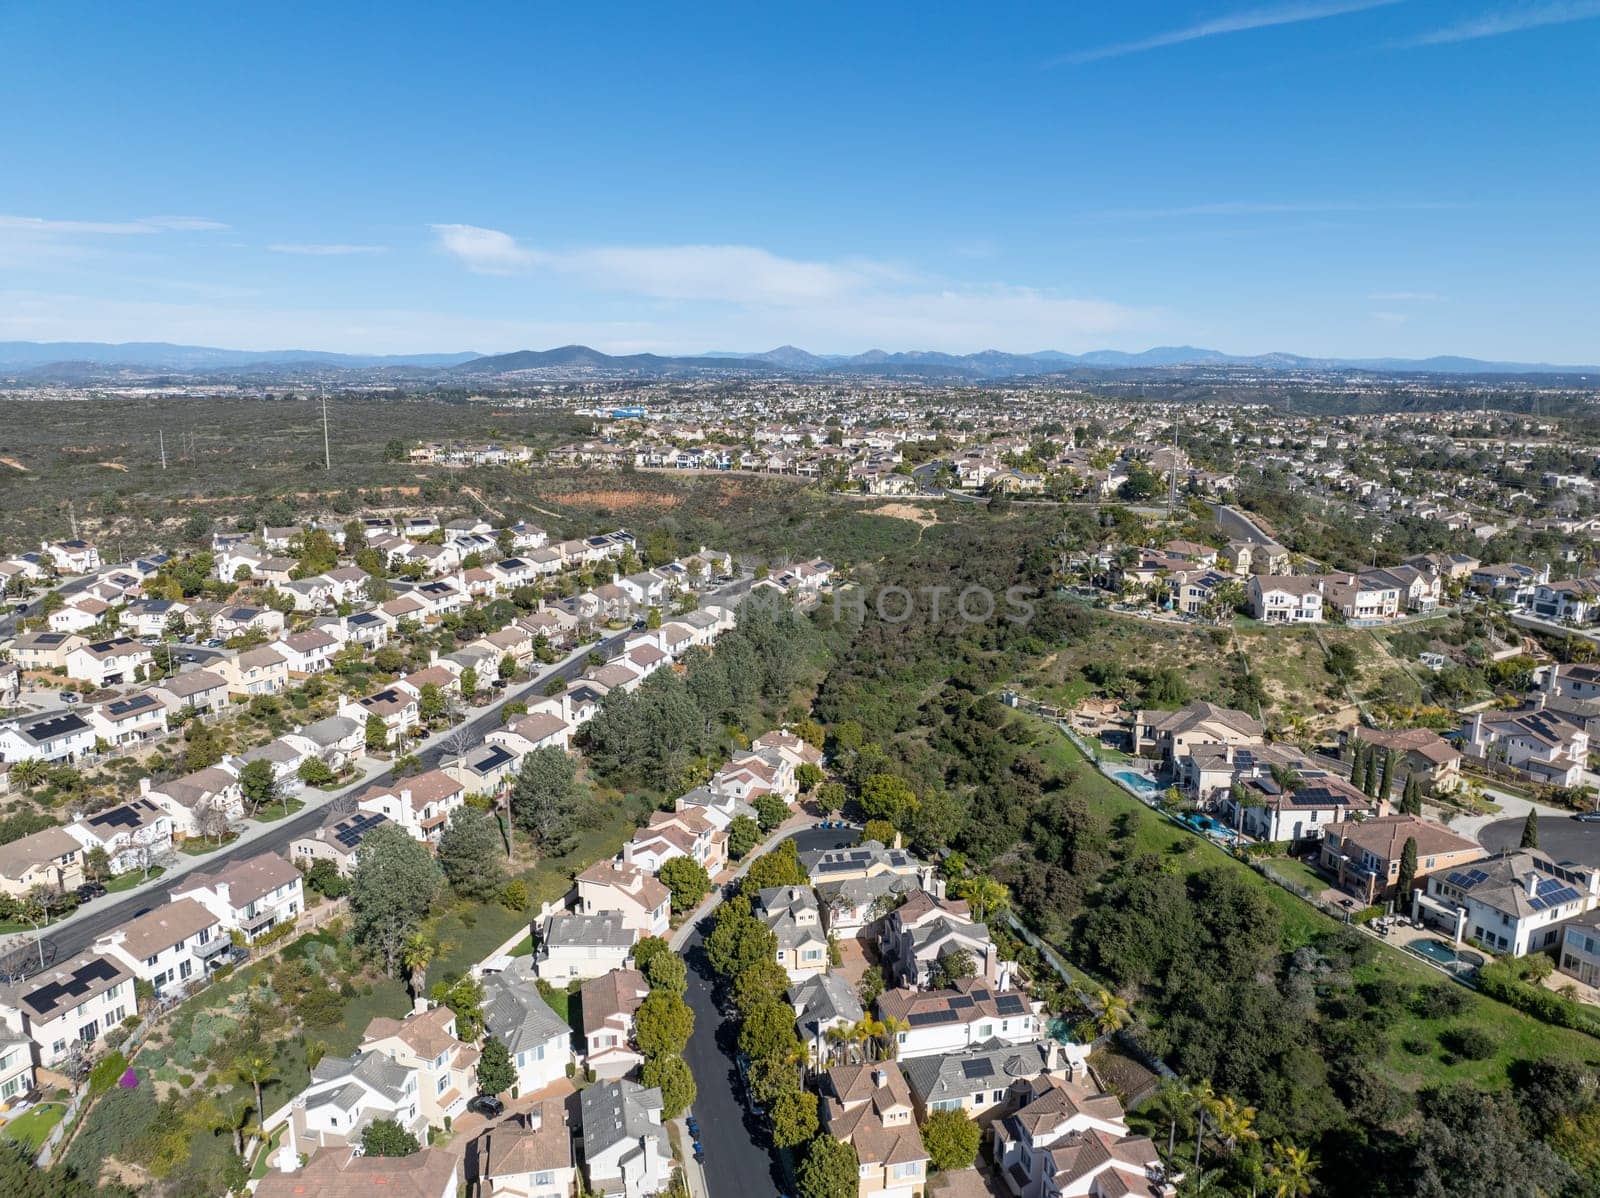 Aerial view of middle class subdivision neighborhood with residential condos and houses in San Diego, California, USA.